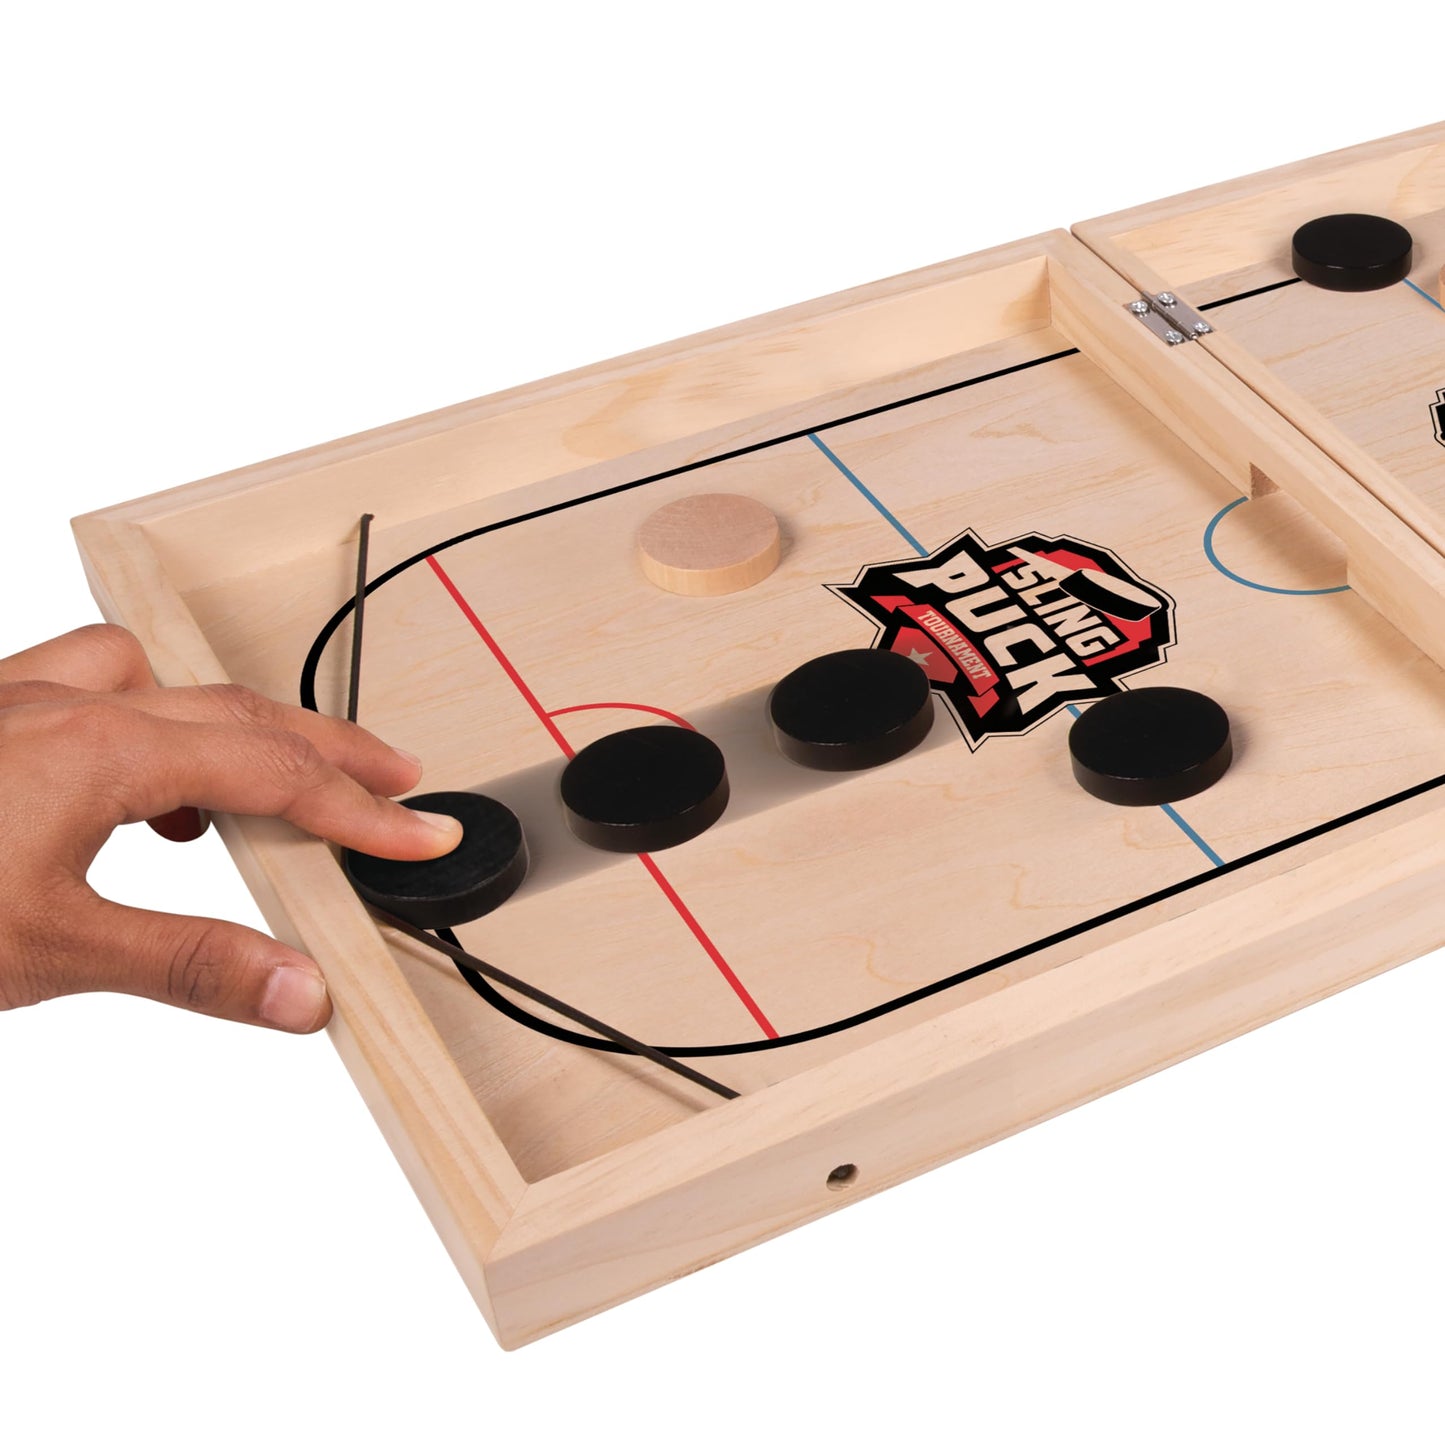 Sling Puck Board Game I Table Top Puck Table Game I Wooden Family Games, Fast Sling Puck Game, Football Slingshot Game I Table Top Hockey Game for